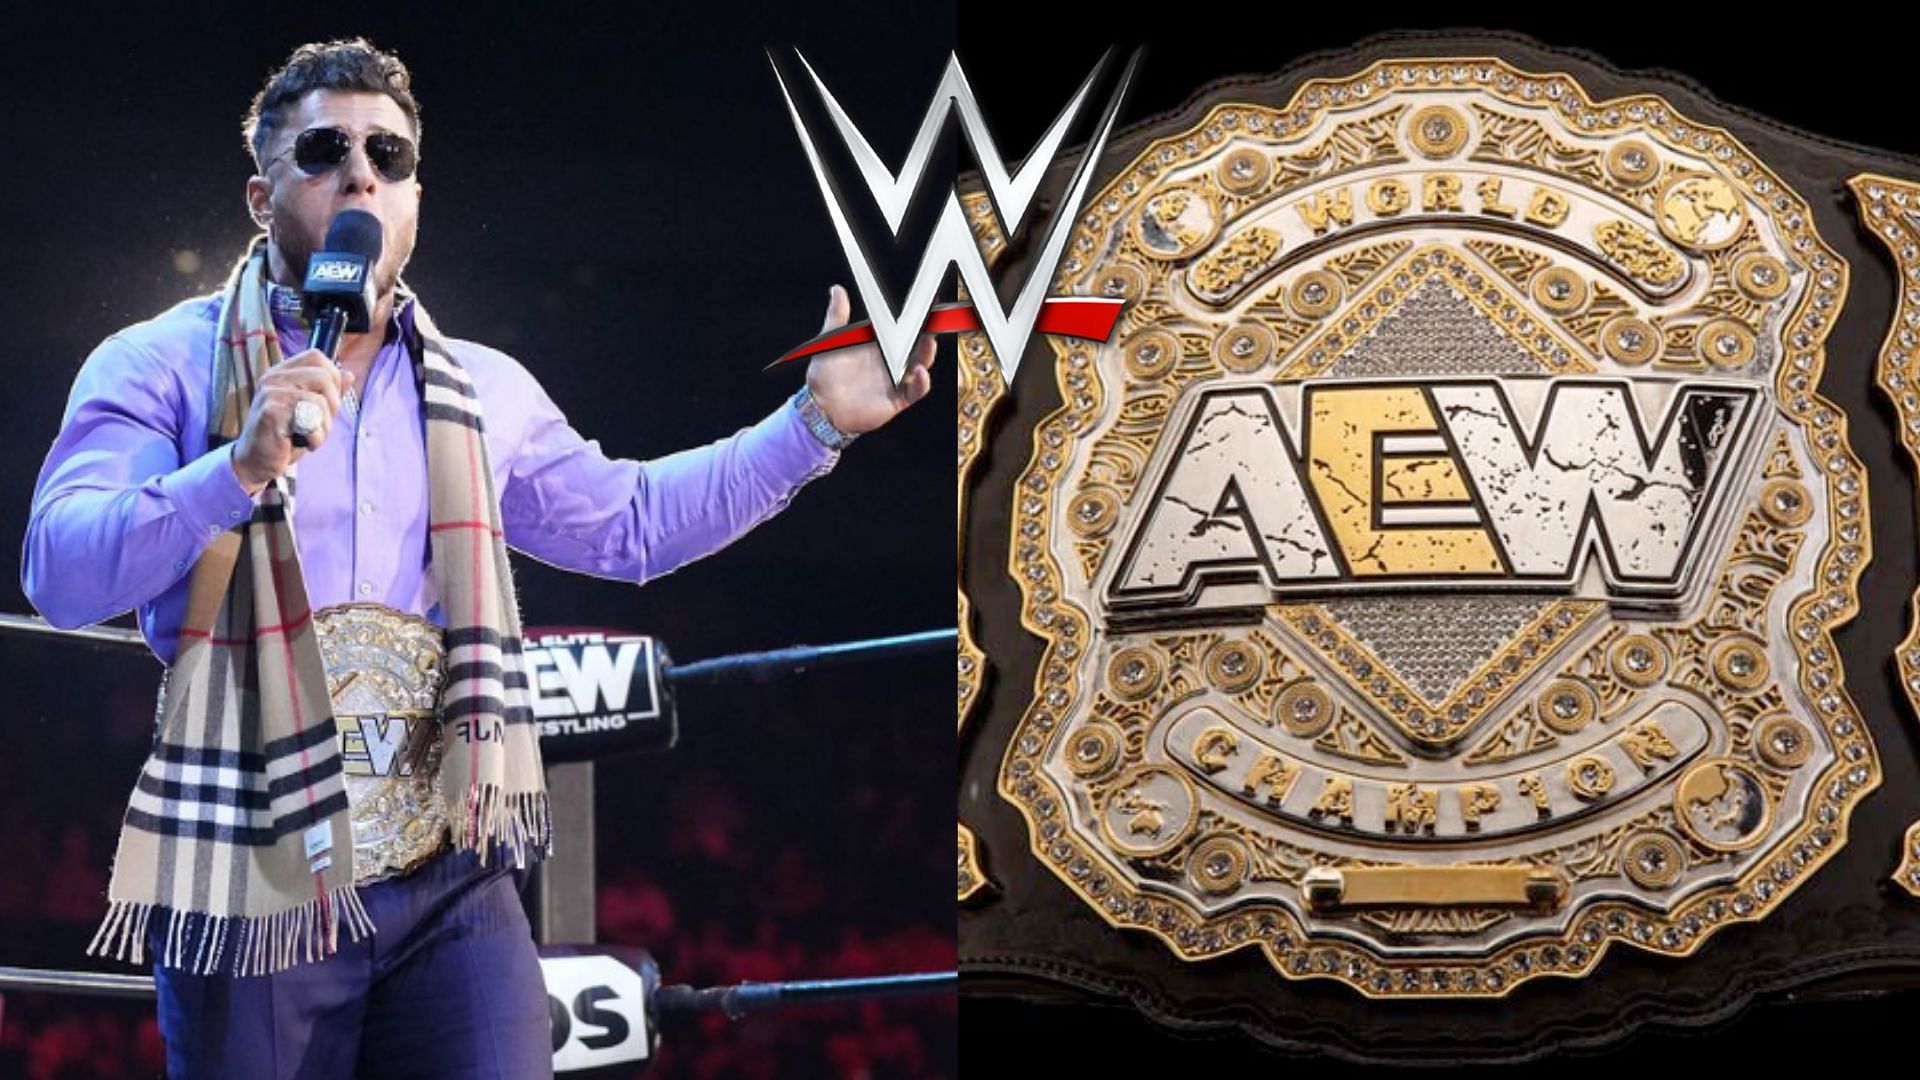 How long will MJF be able to hold on to his title?